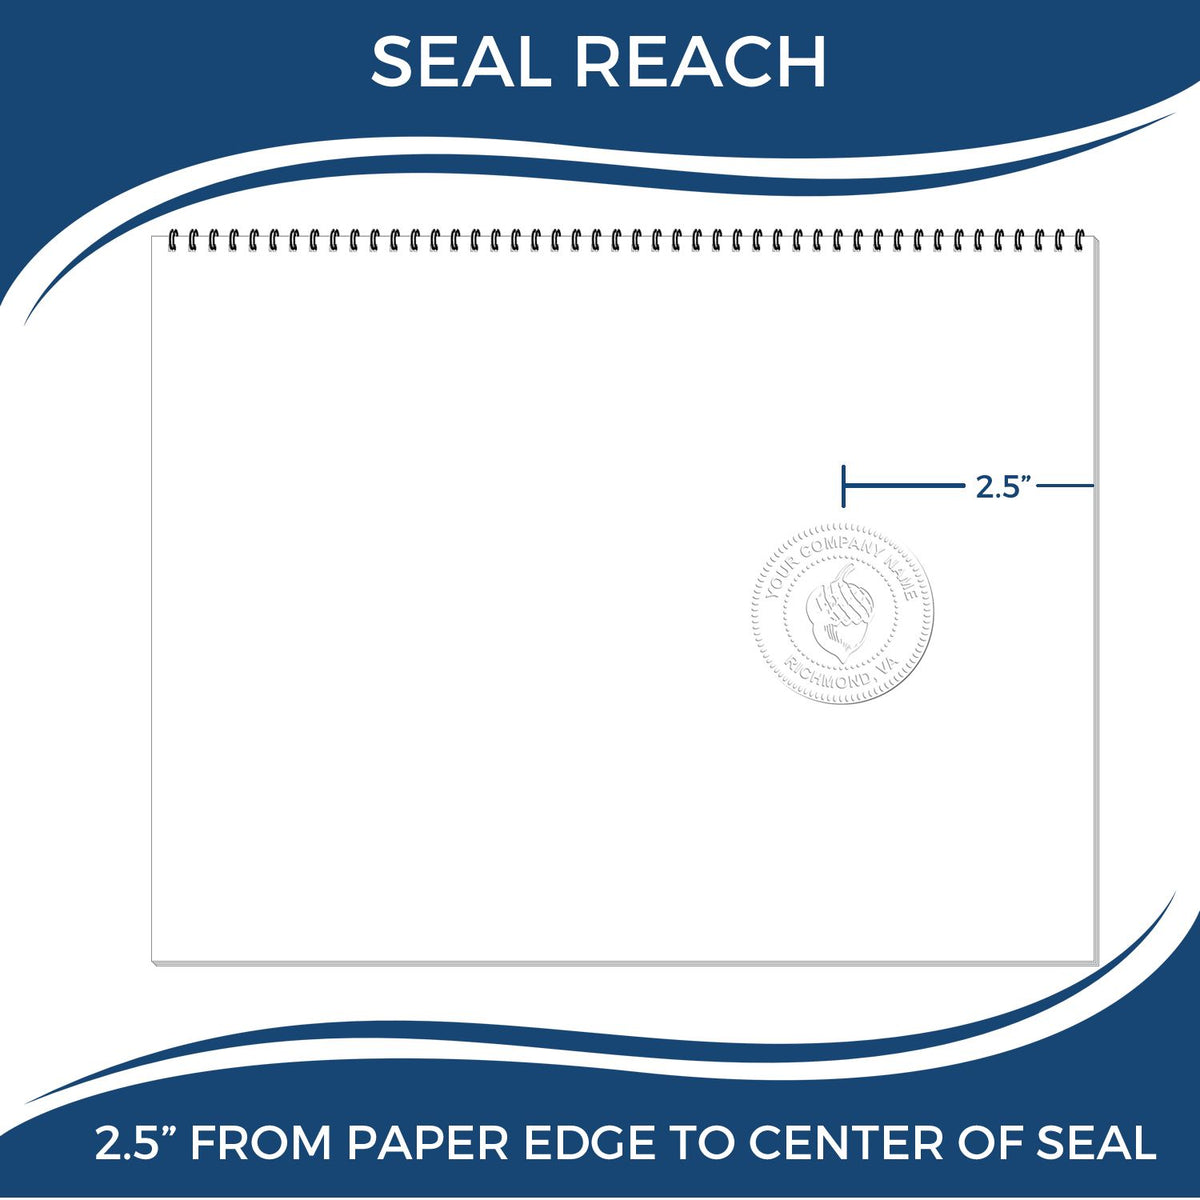 An infographic showing the seal reach which is represented by a ruler and a miniature seal image of the State of Indiana Long Reach Architectural Embossing Seal